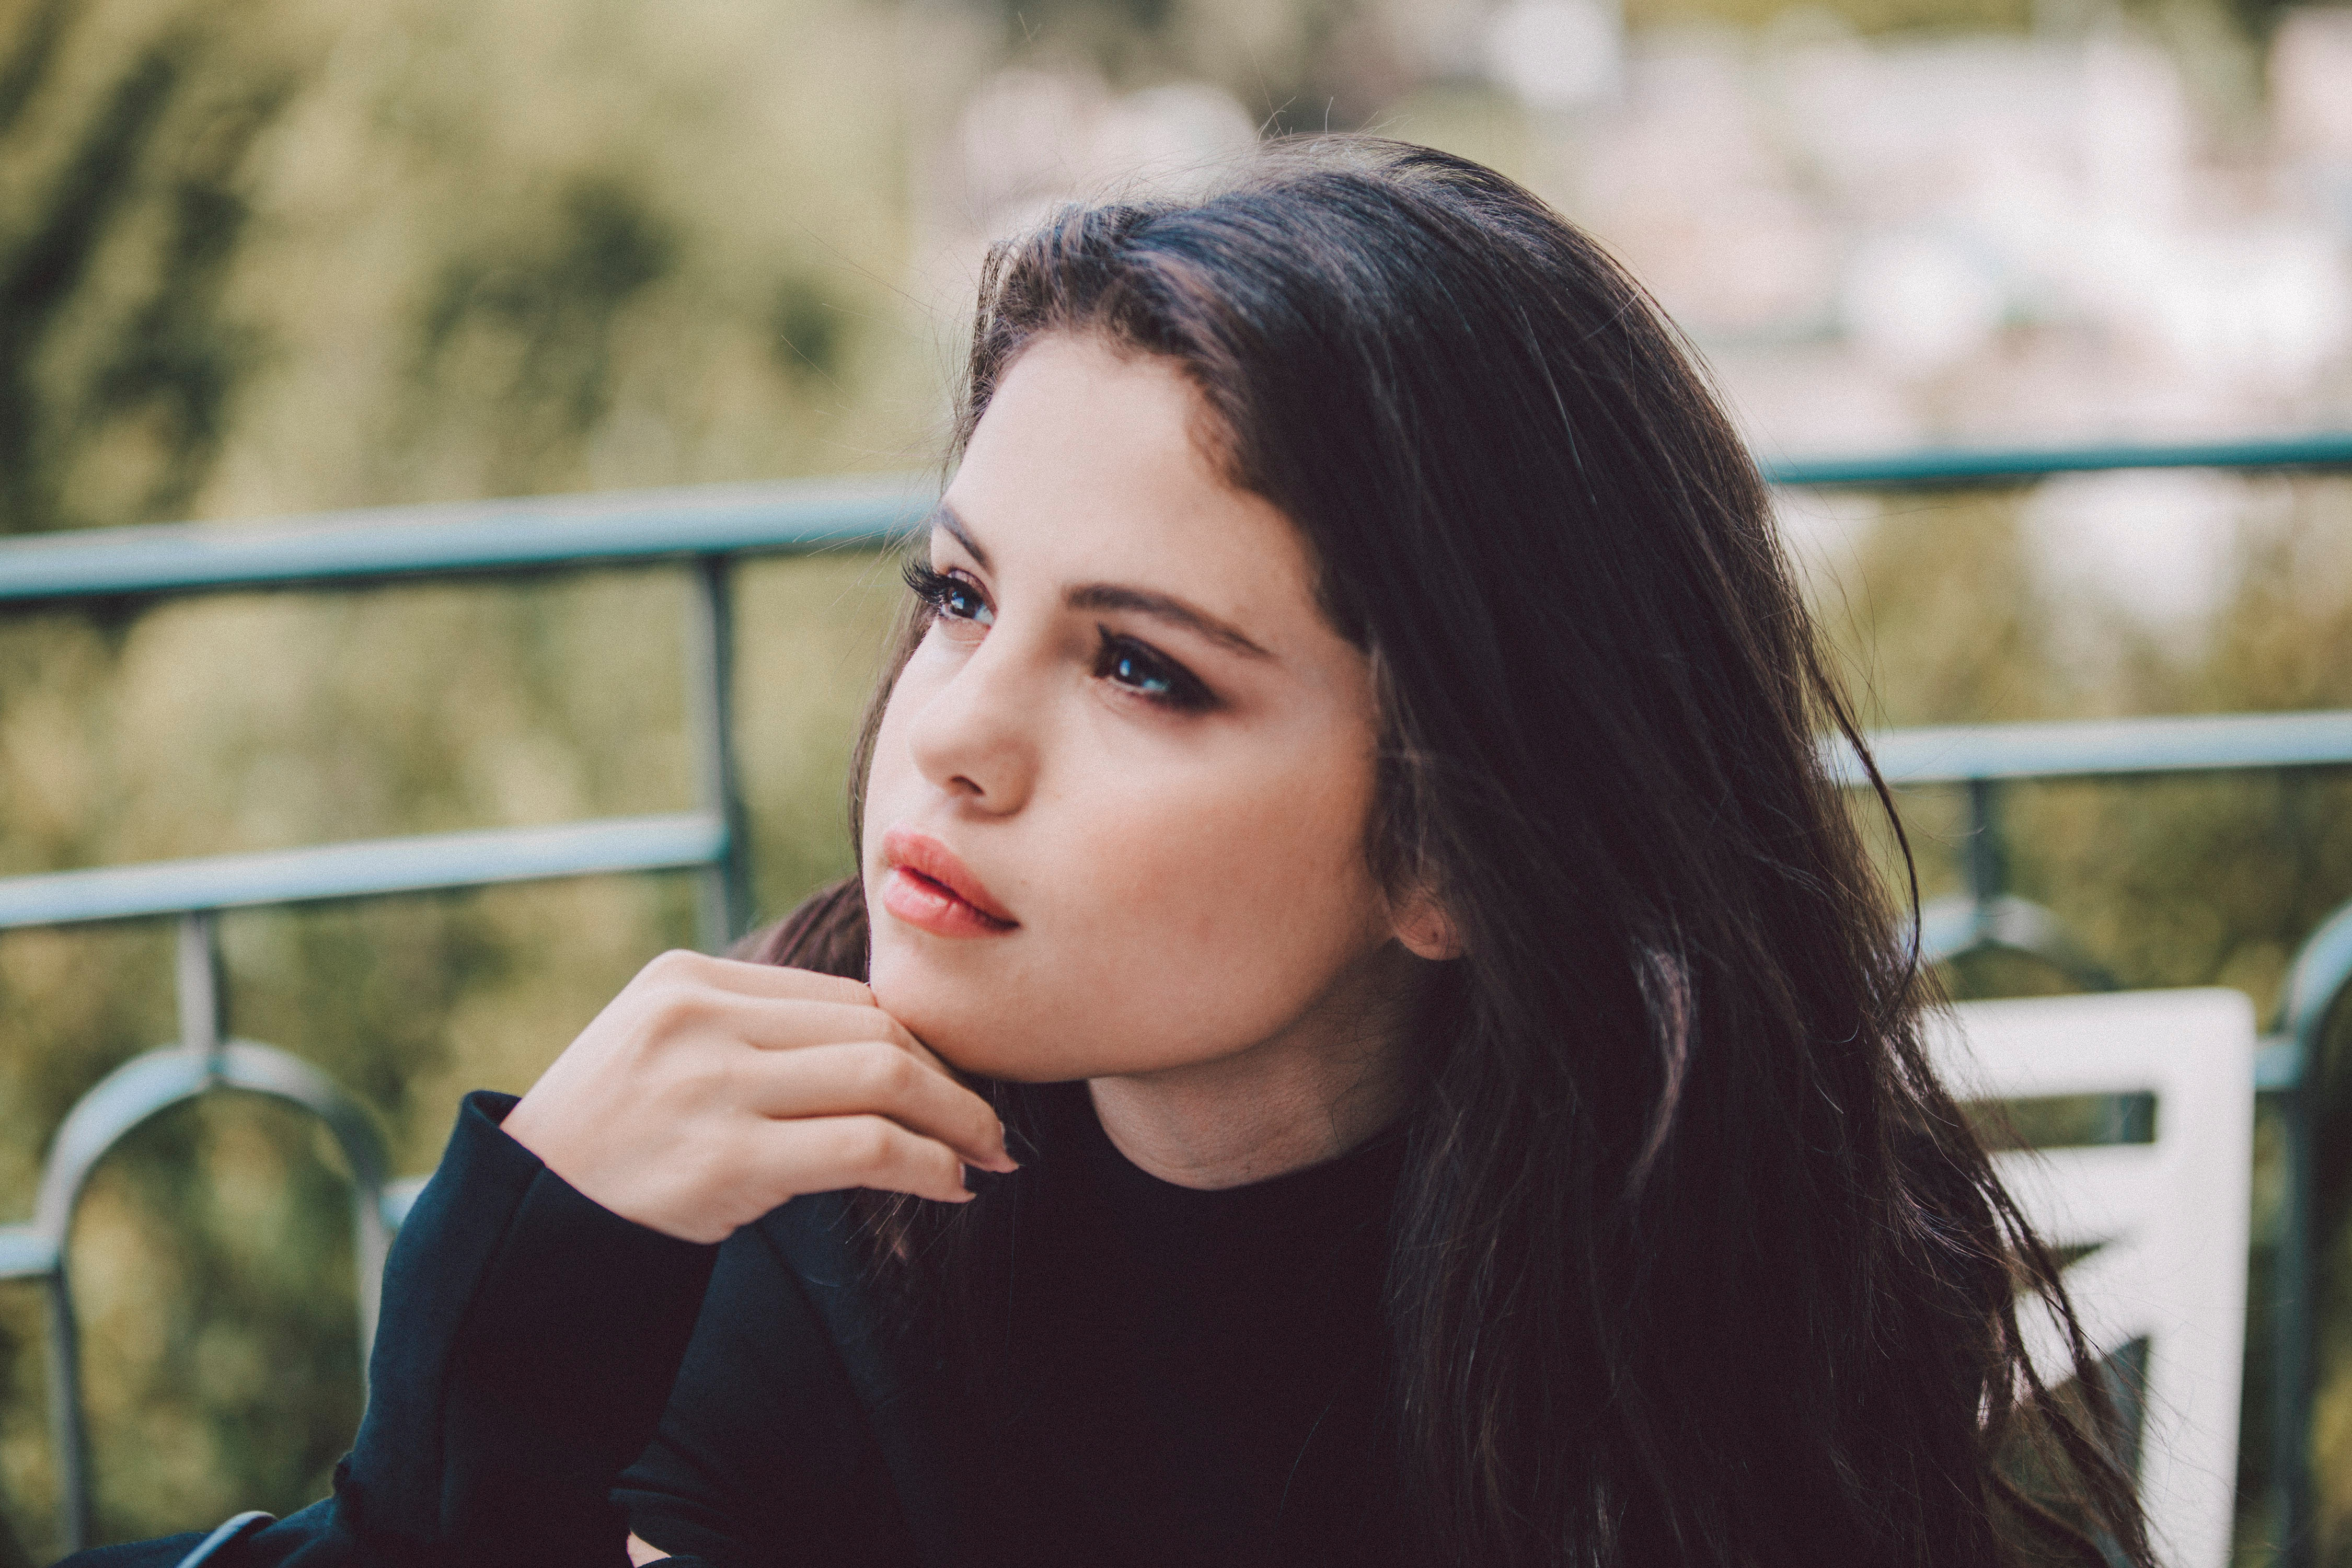 Selena Gomez says she gets in "trouble" when she talks about her music